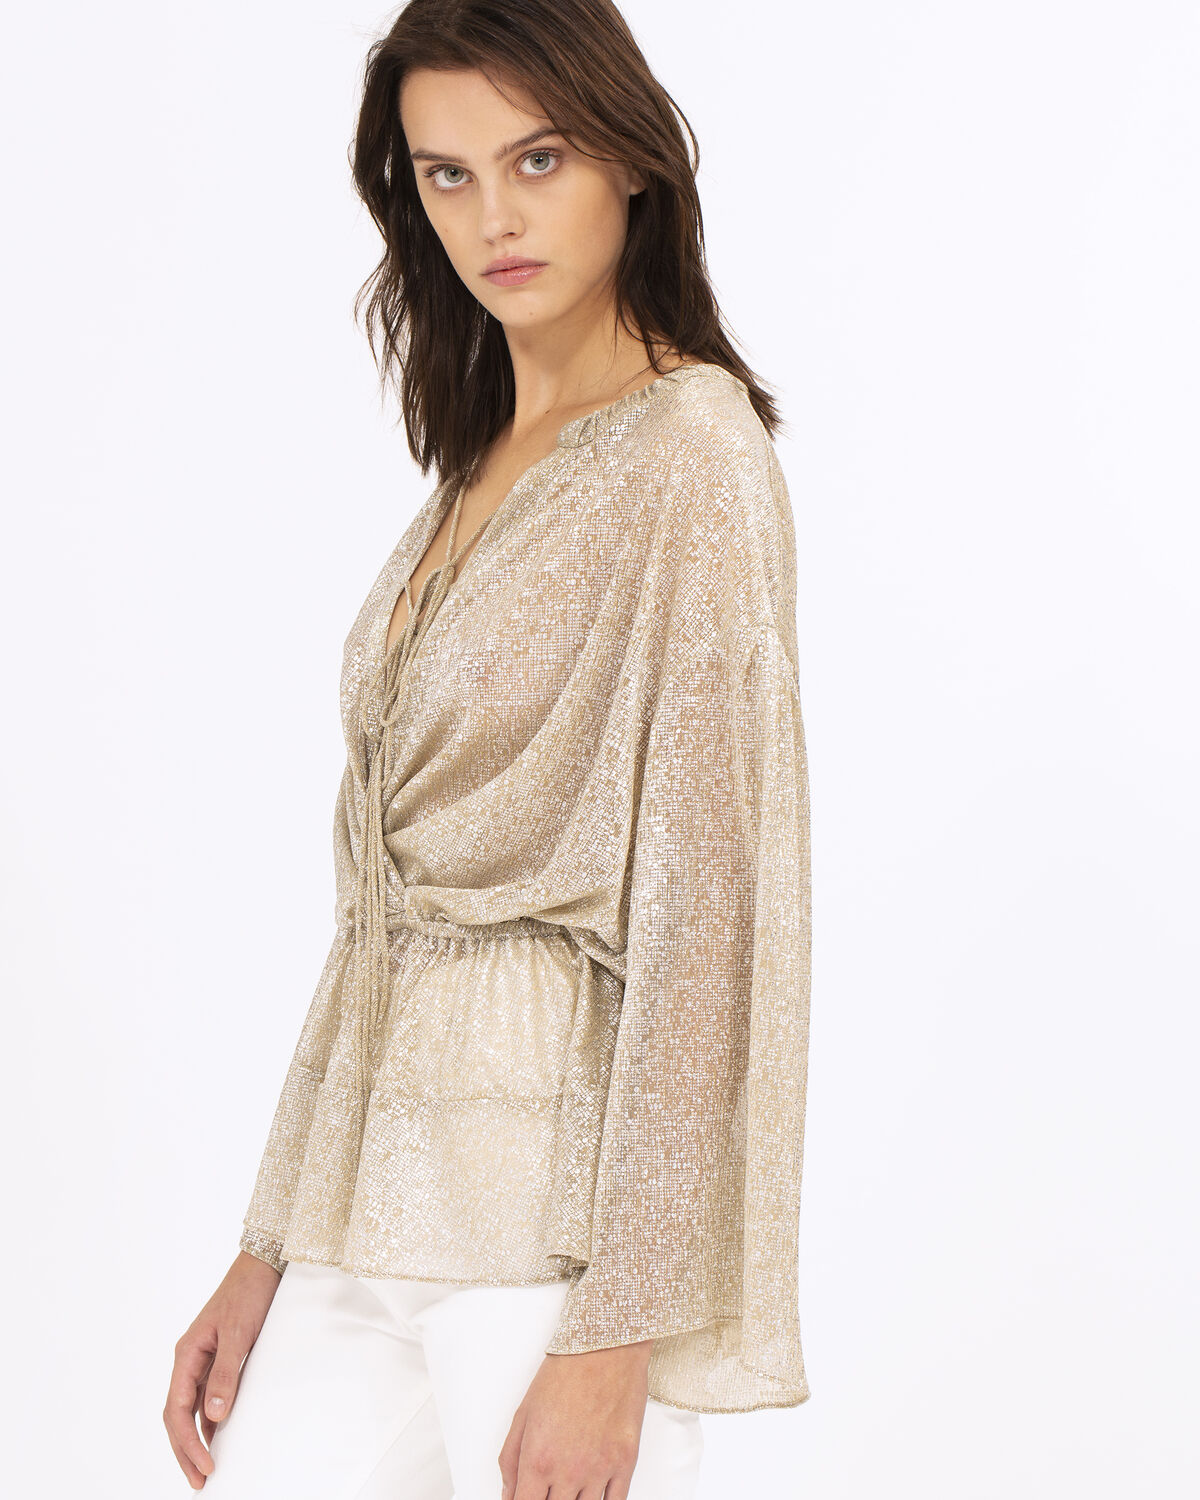 Photo of IRO Paris Spacious Top Light Nude - This Top Features Long Flared Sleeves, A Deep Crossed V-neck And Brilliant Lurex Details. With Its Marked Waist, It Will Bring A Feminine Touch To All Your Looks. Shirts-Tops